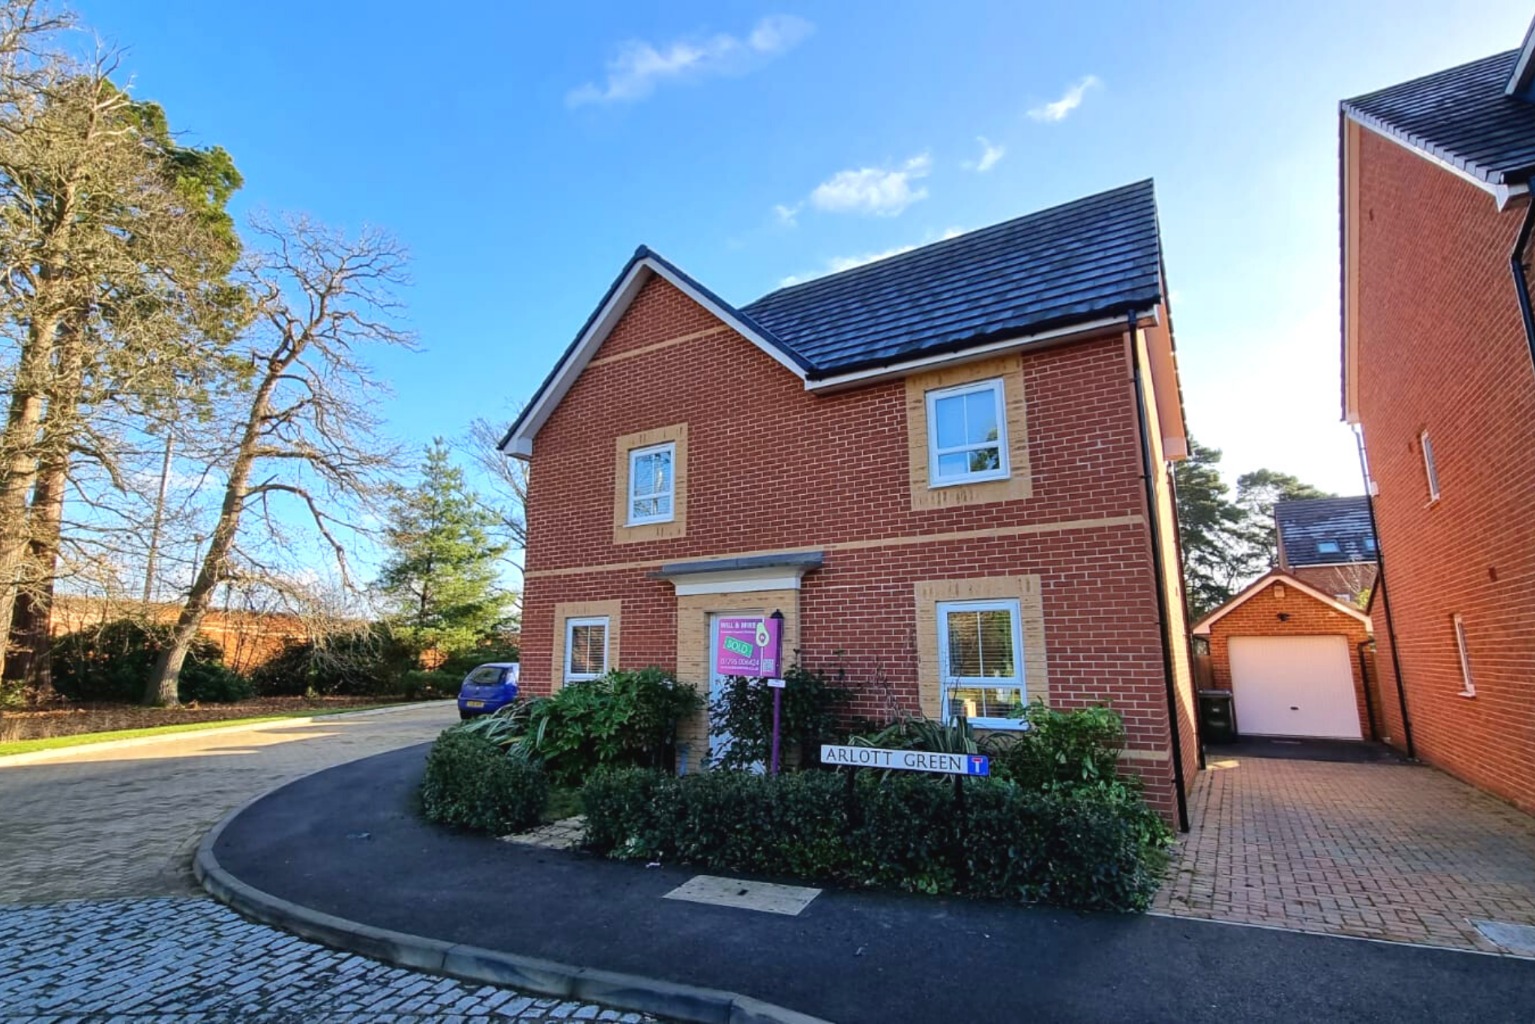 **SSTC PRIOR TO MARKETING*This excellent four bedroom detached family home is one of only eight built in Cricket Field Grove. Constructed to a high specification in 2018, the home is in fantastic condition throughout and has the bonus its own garage and driveway. We can't wait to take you on a tour.